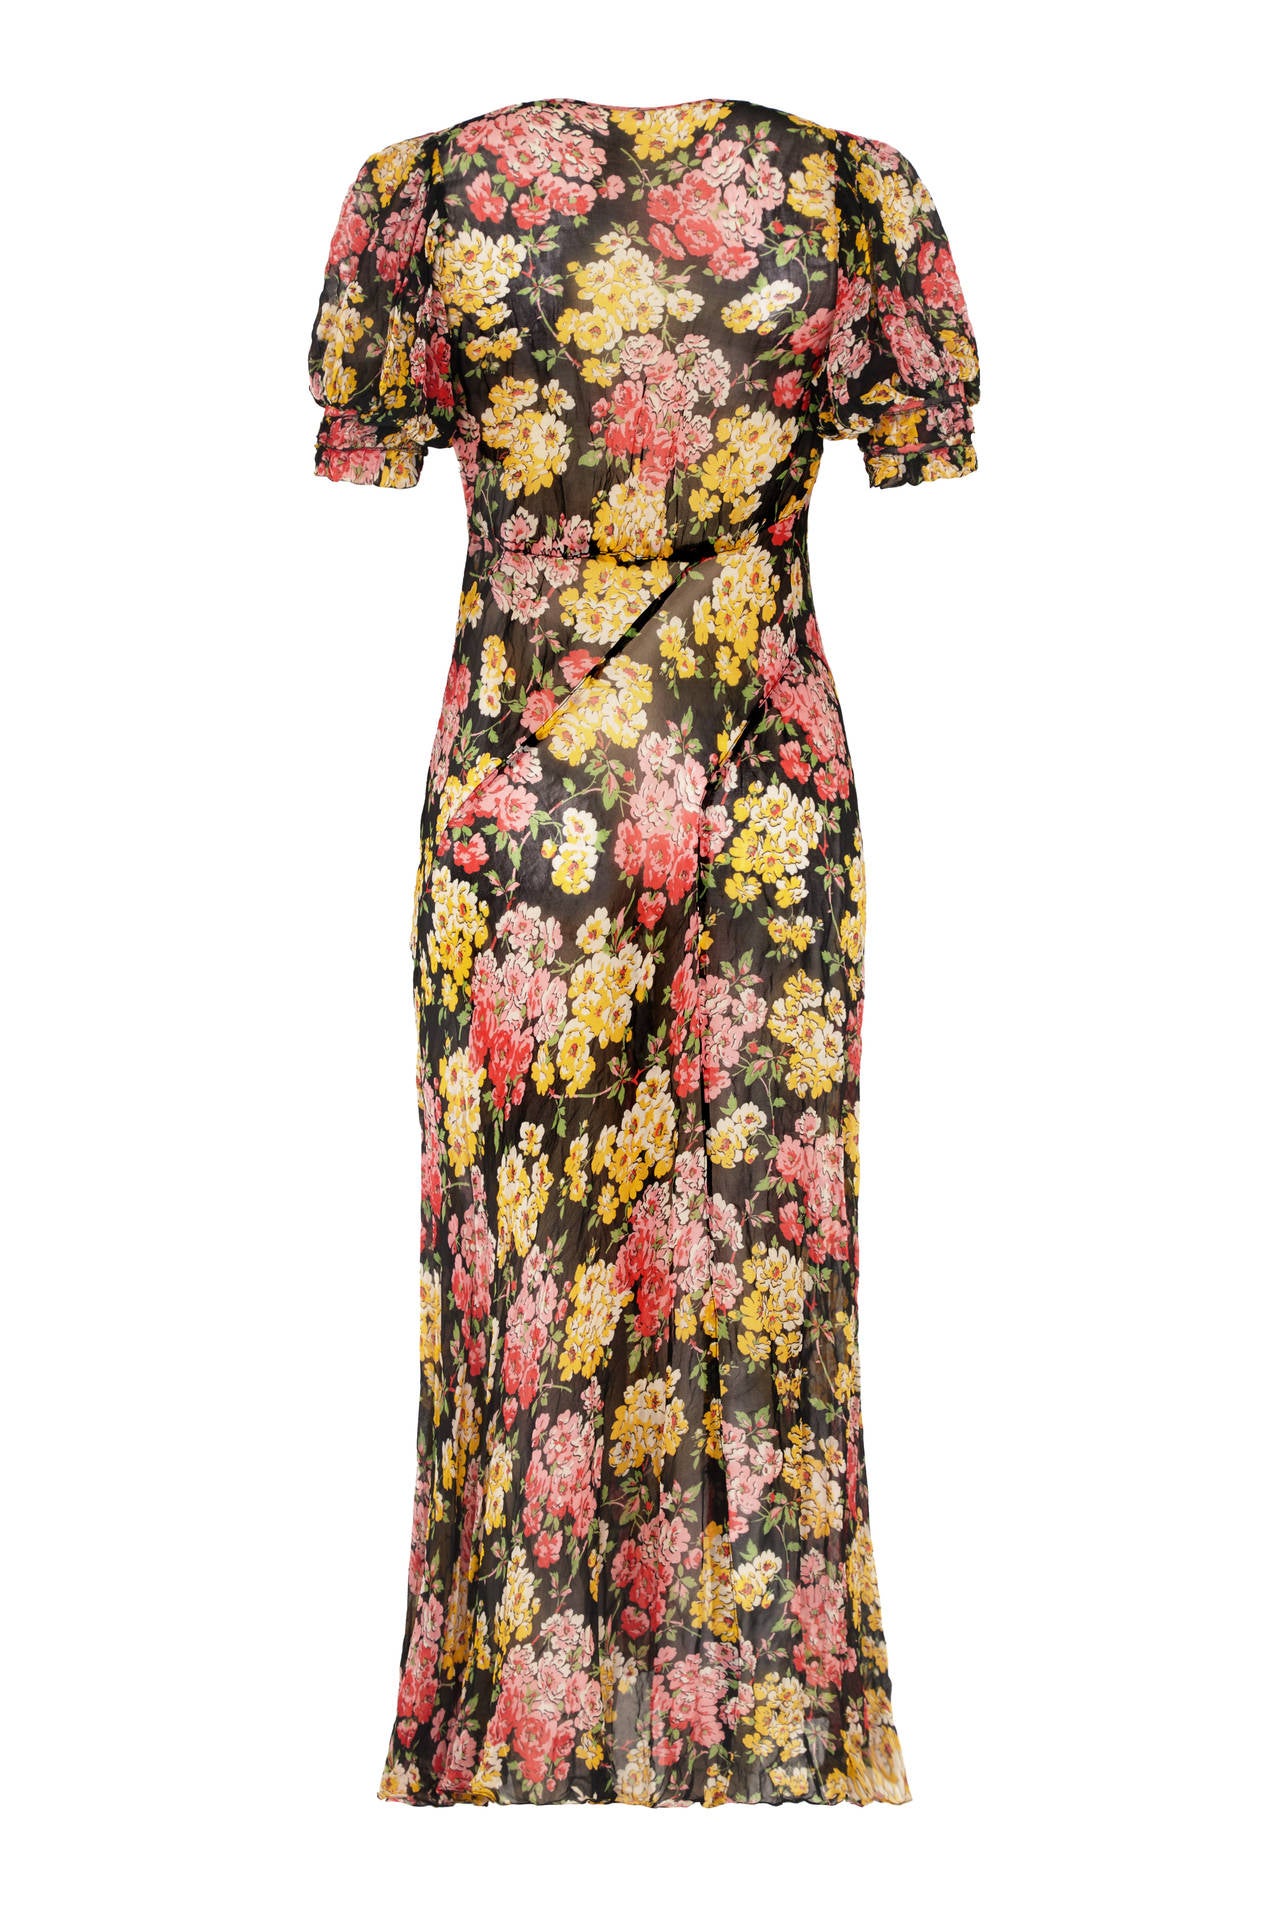 Beautiful bias cut chiffon dress with asymmetrical panels. This sheer and floaty summer dress features a pretty pink, yellow and green floral print on a black background and has a sailor style collar to the front and puff sleeves.  There are no